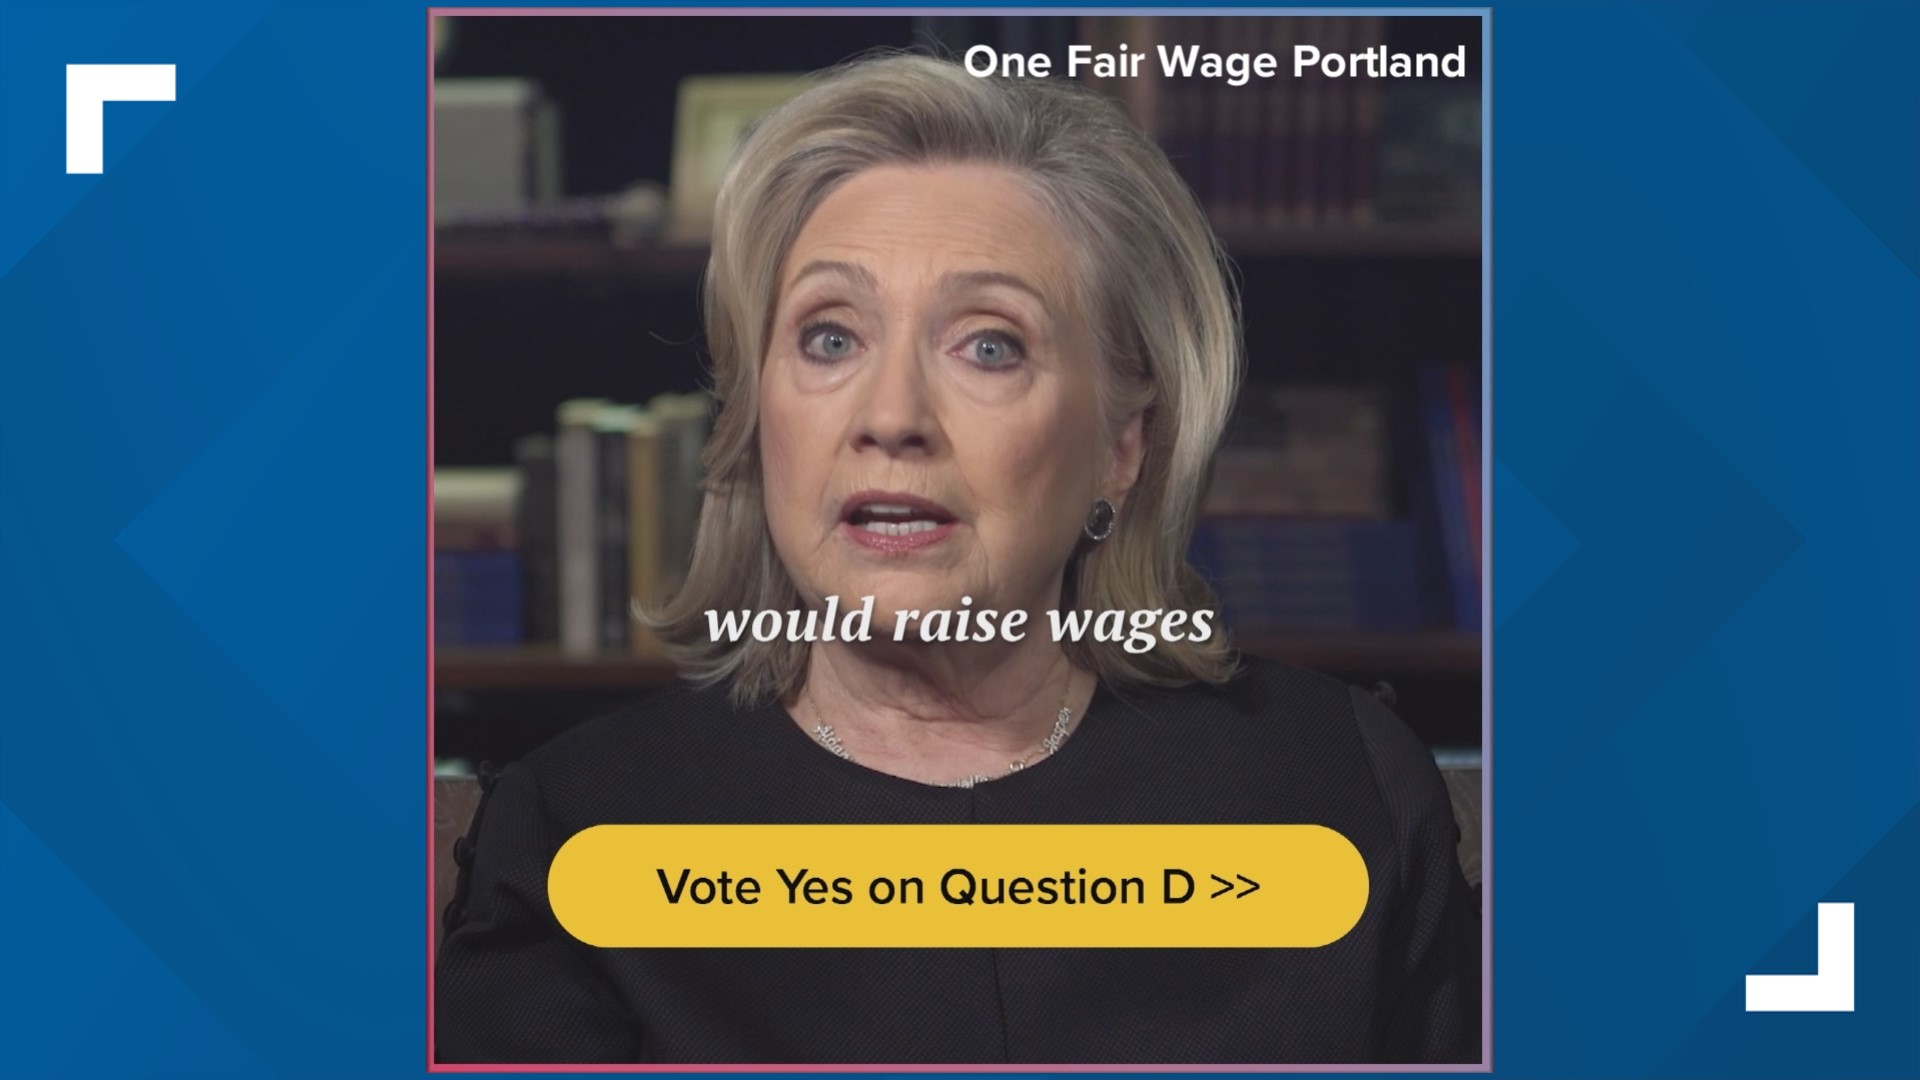 The former Secretary of State will appear in a social media ad campaign for One Fair Wage Portland in support of Question D.